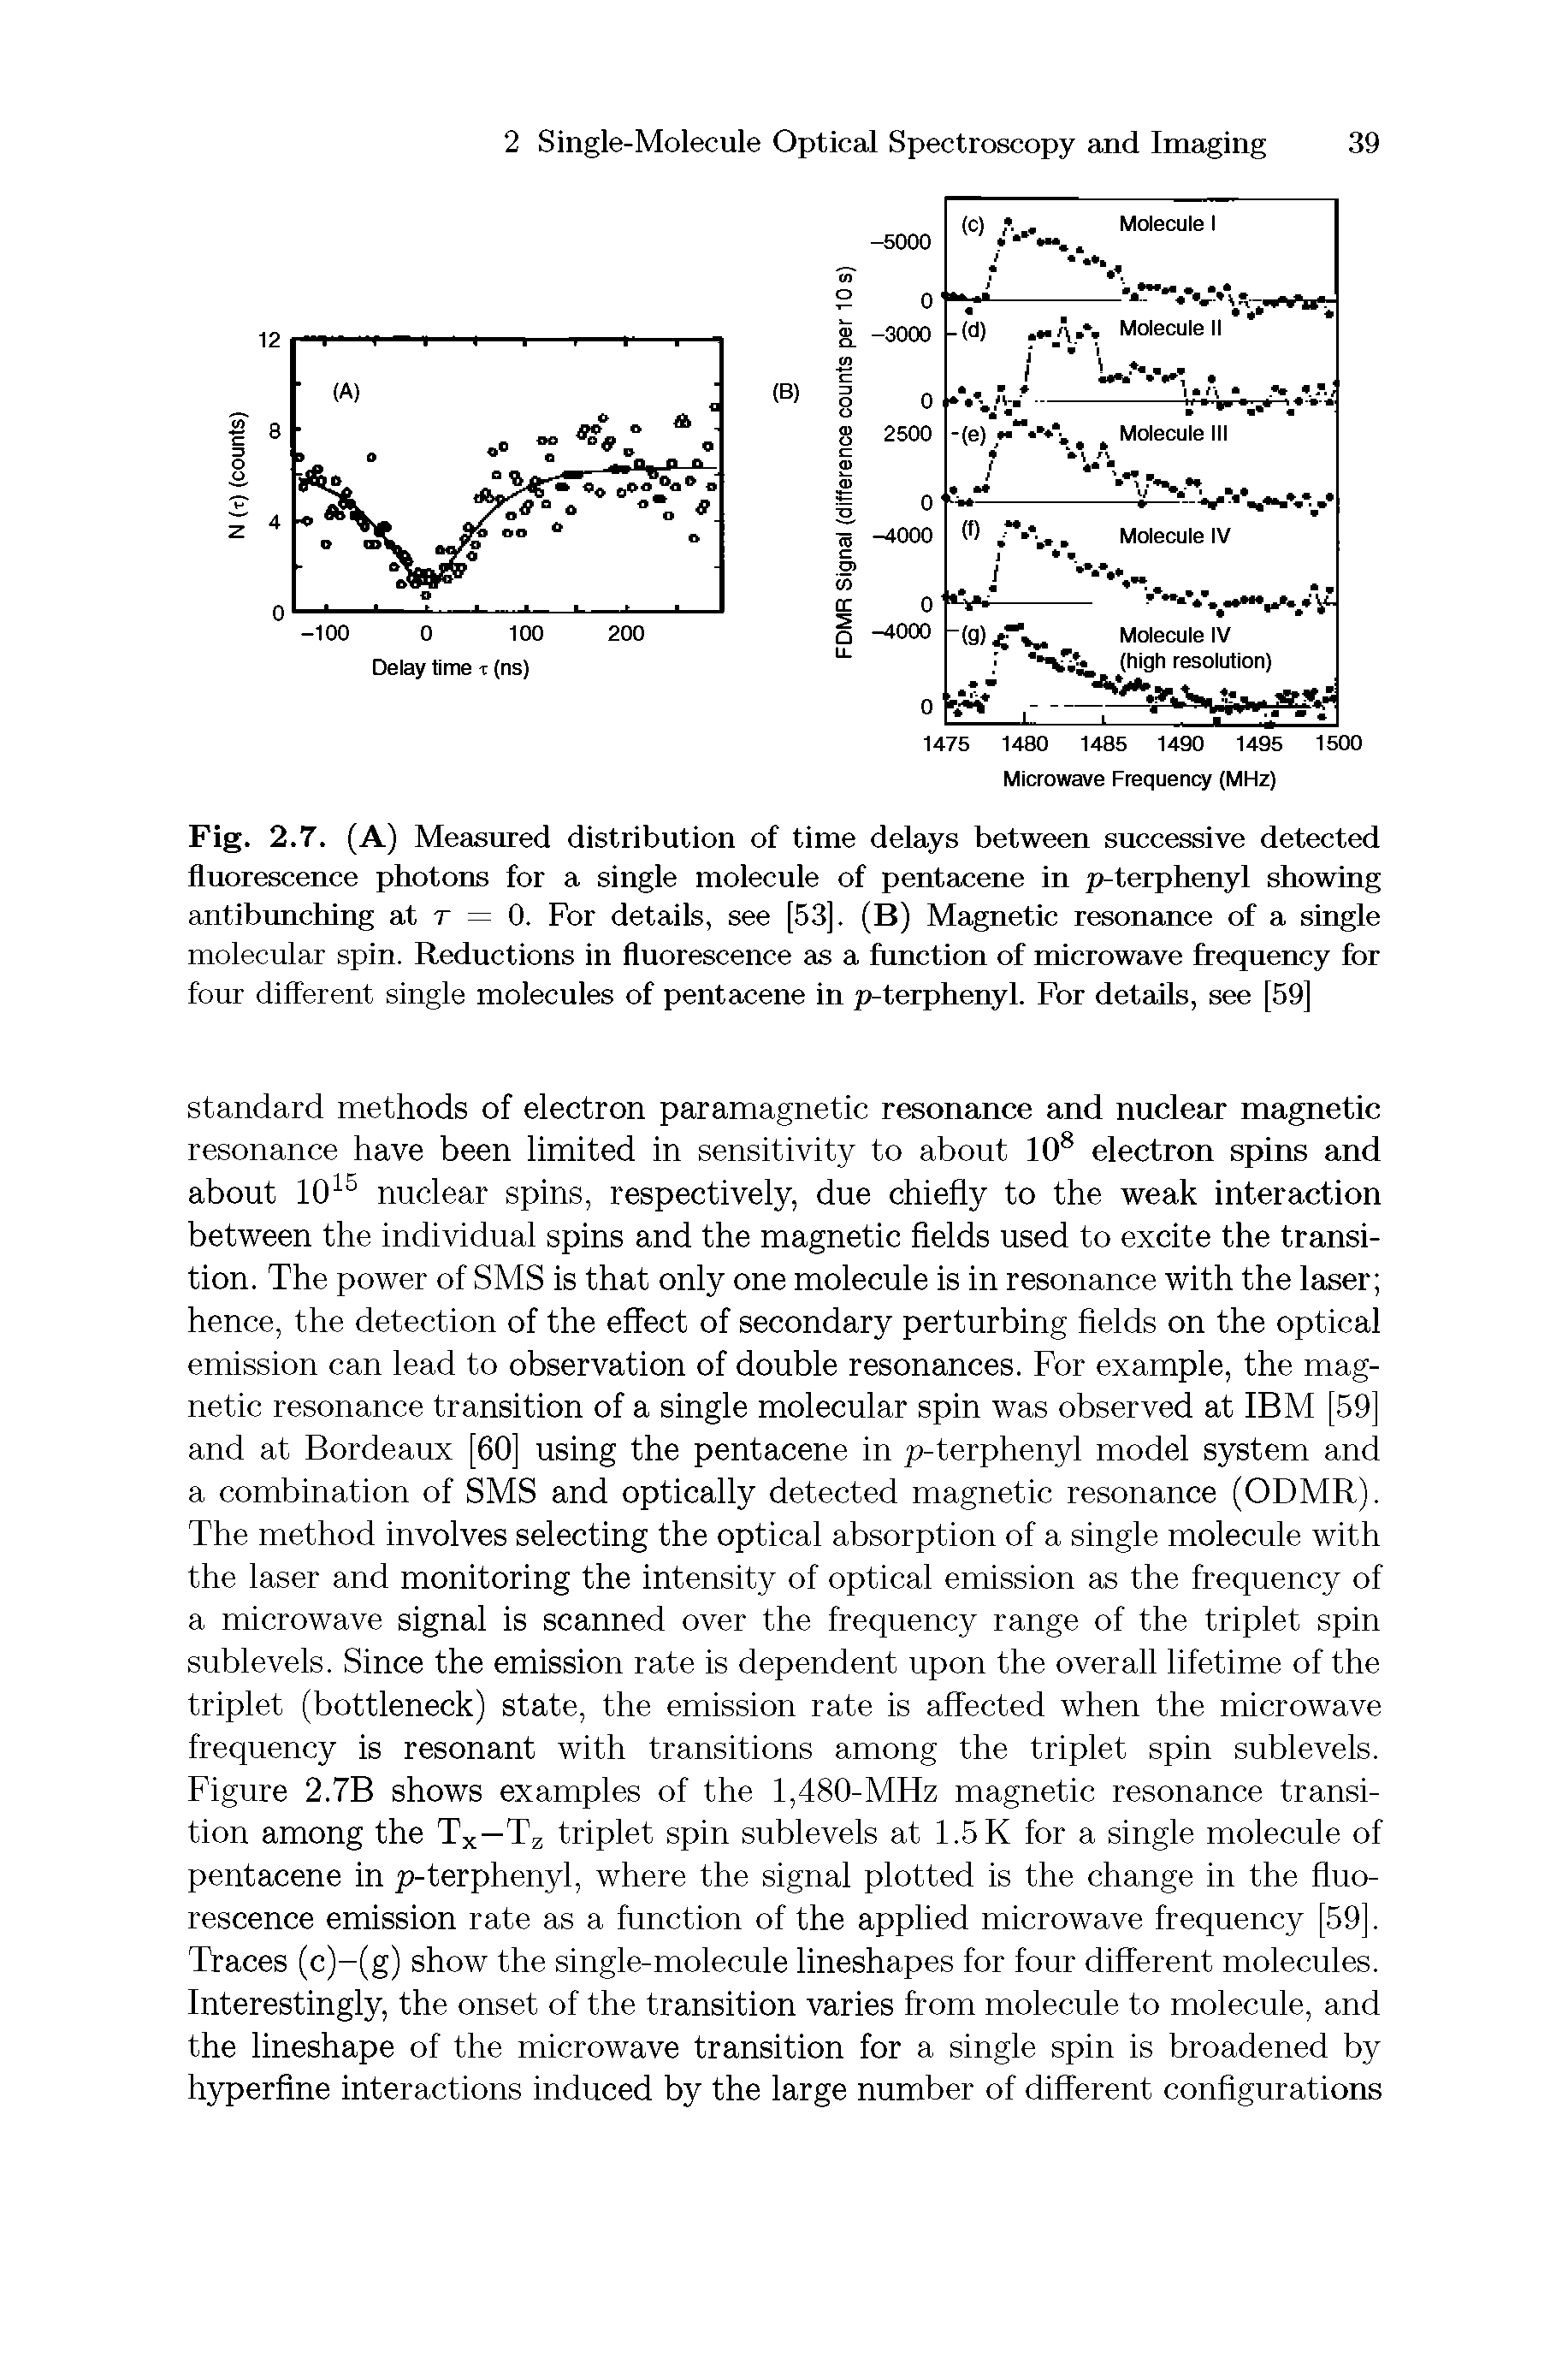 Fig. 2.7. (A) Measured distribution of time delays between successive detected fluorescence photons for a single molecule of pentacene in p-terphenyl showing antibunching at r = 0. For details, see [53]. (B) Magnetic resonance of a single molecular spin. Reductions in fluorescence as a function of microwave frequency for four different single molecules of pentacene in p-terphenyl. For details, see [59]...